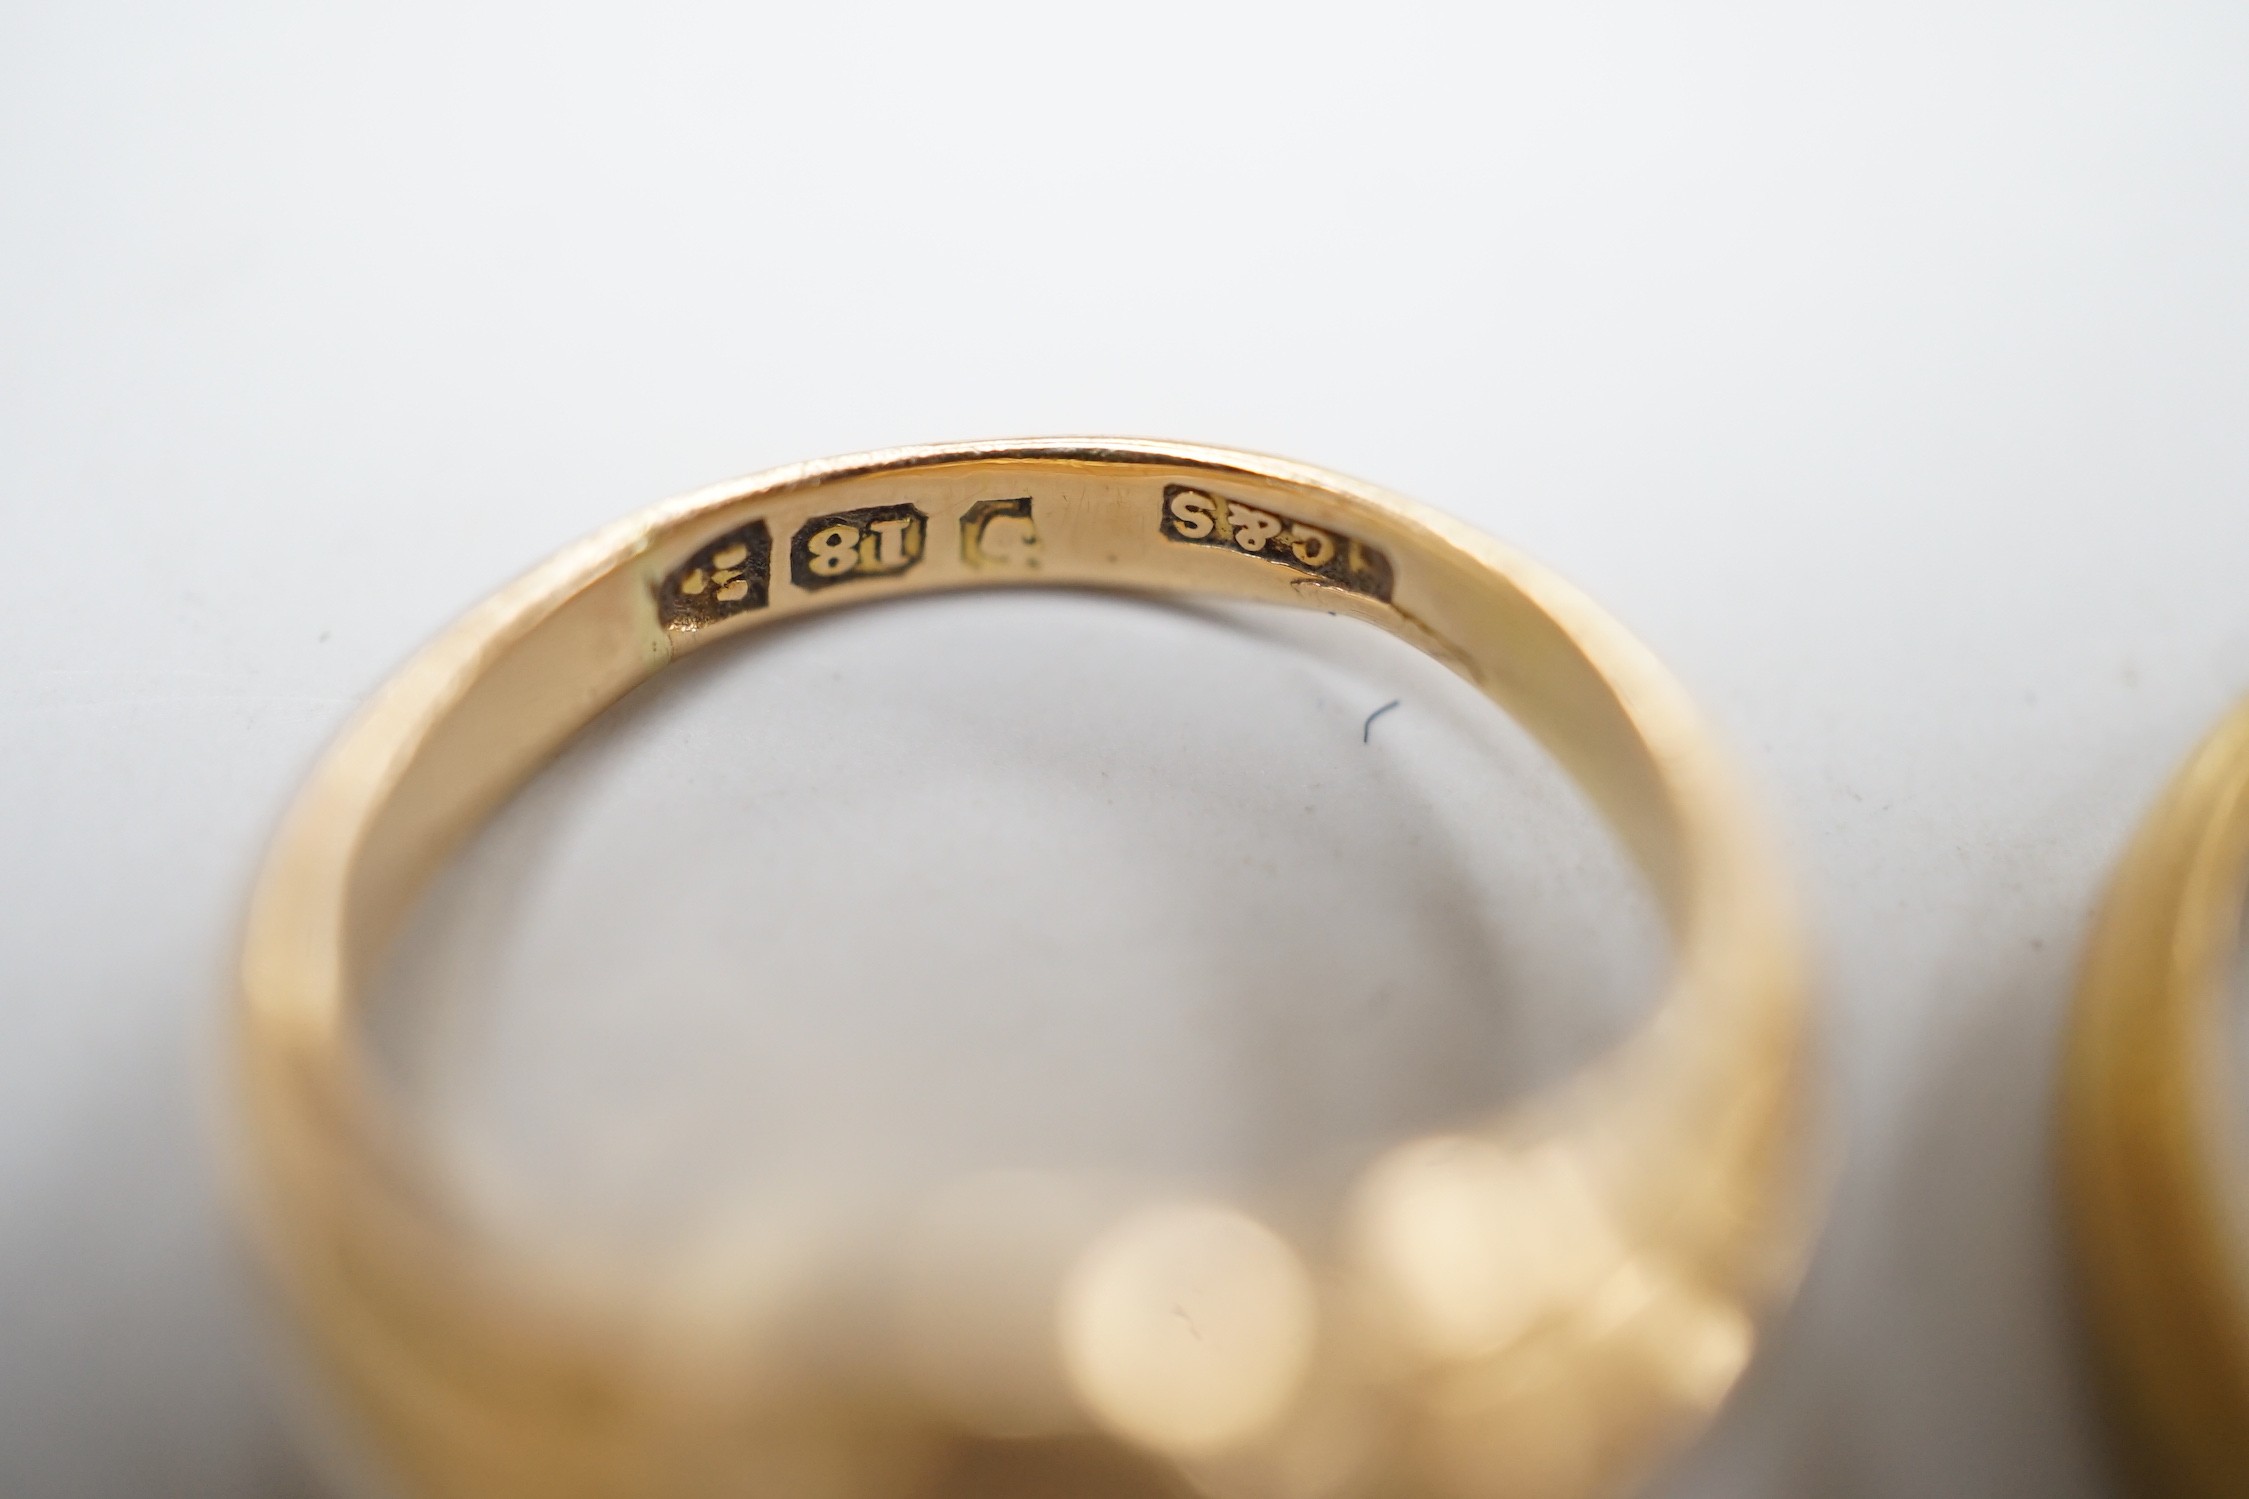 An early 20th century small 18ct gold signet ring, engraved with armorial, size G/H and a modern 18ct gold band, size I, with engraved inscription, 7.6 grams.